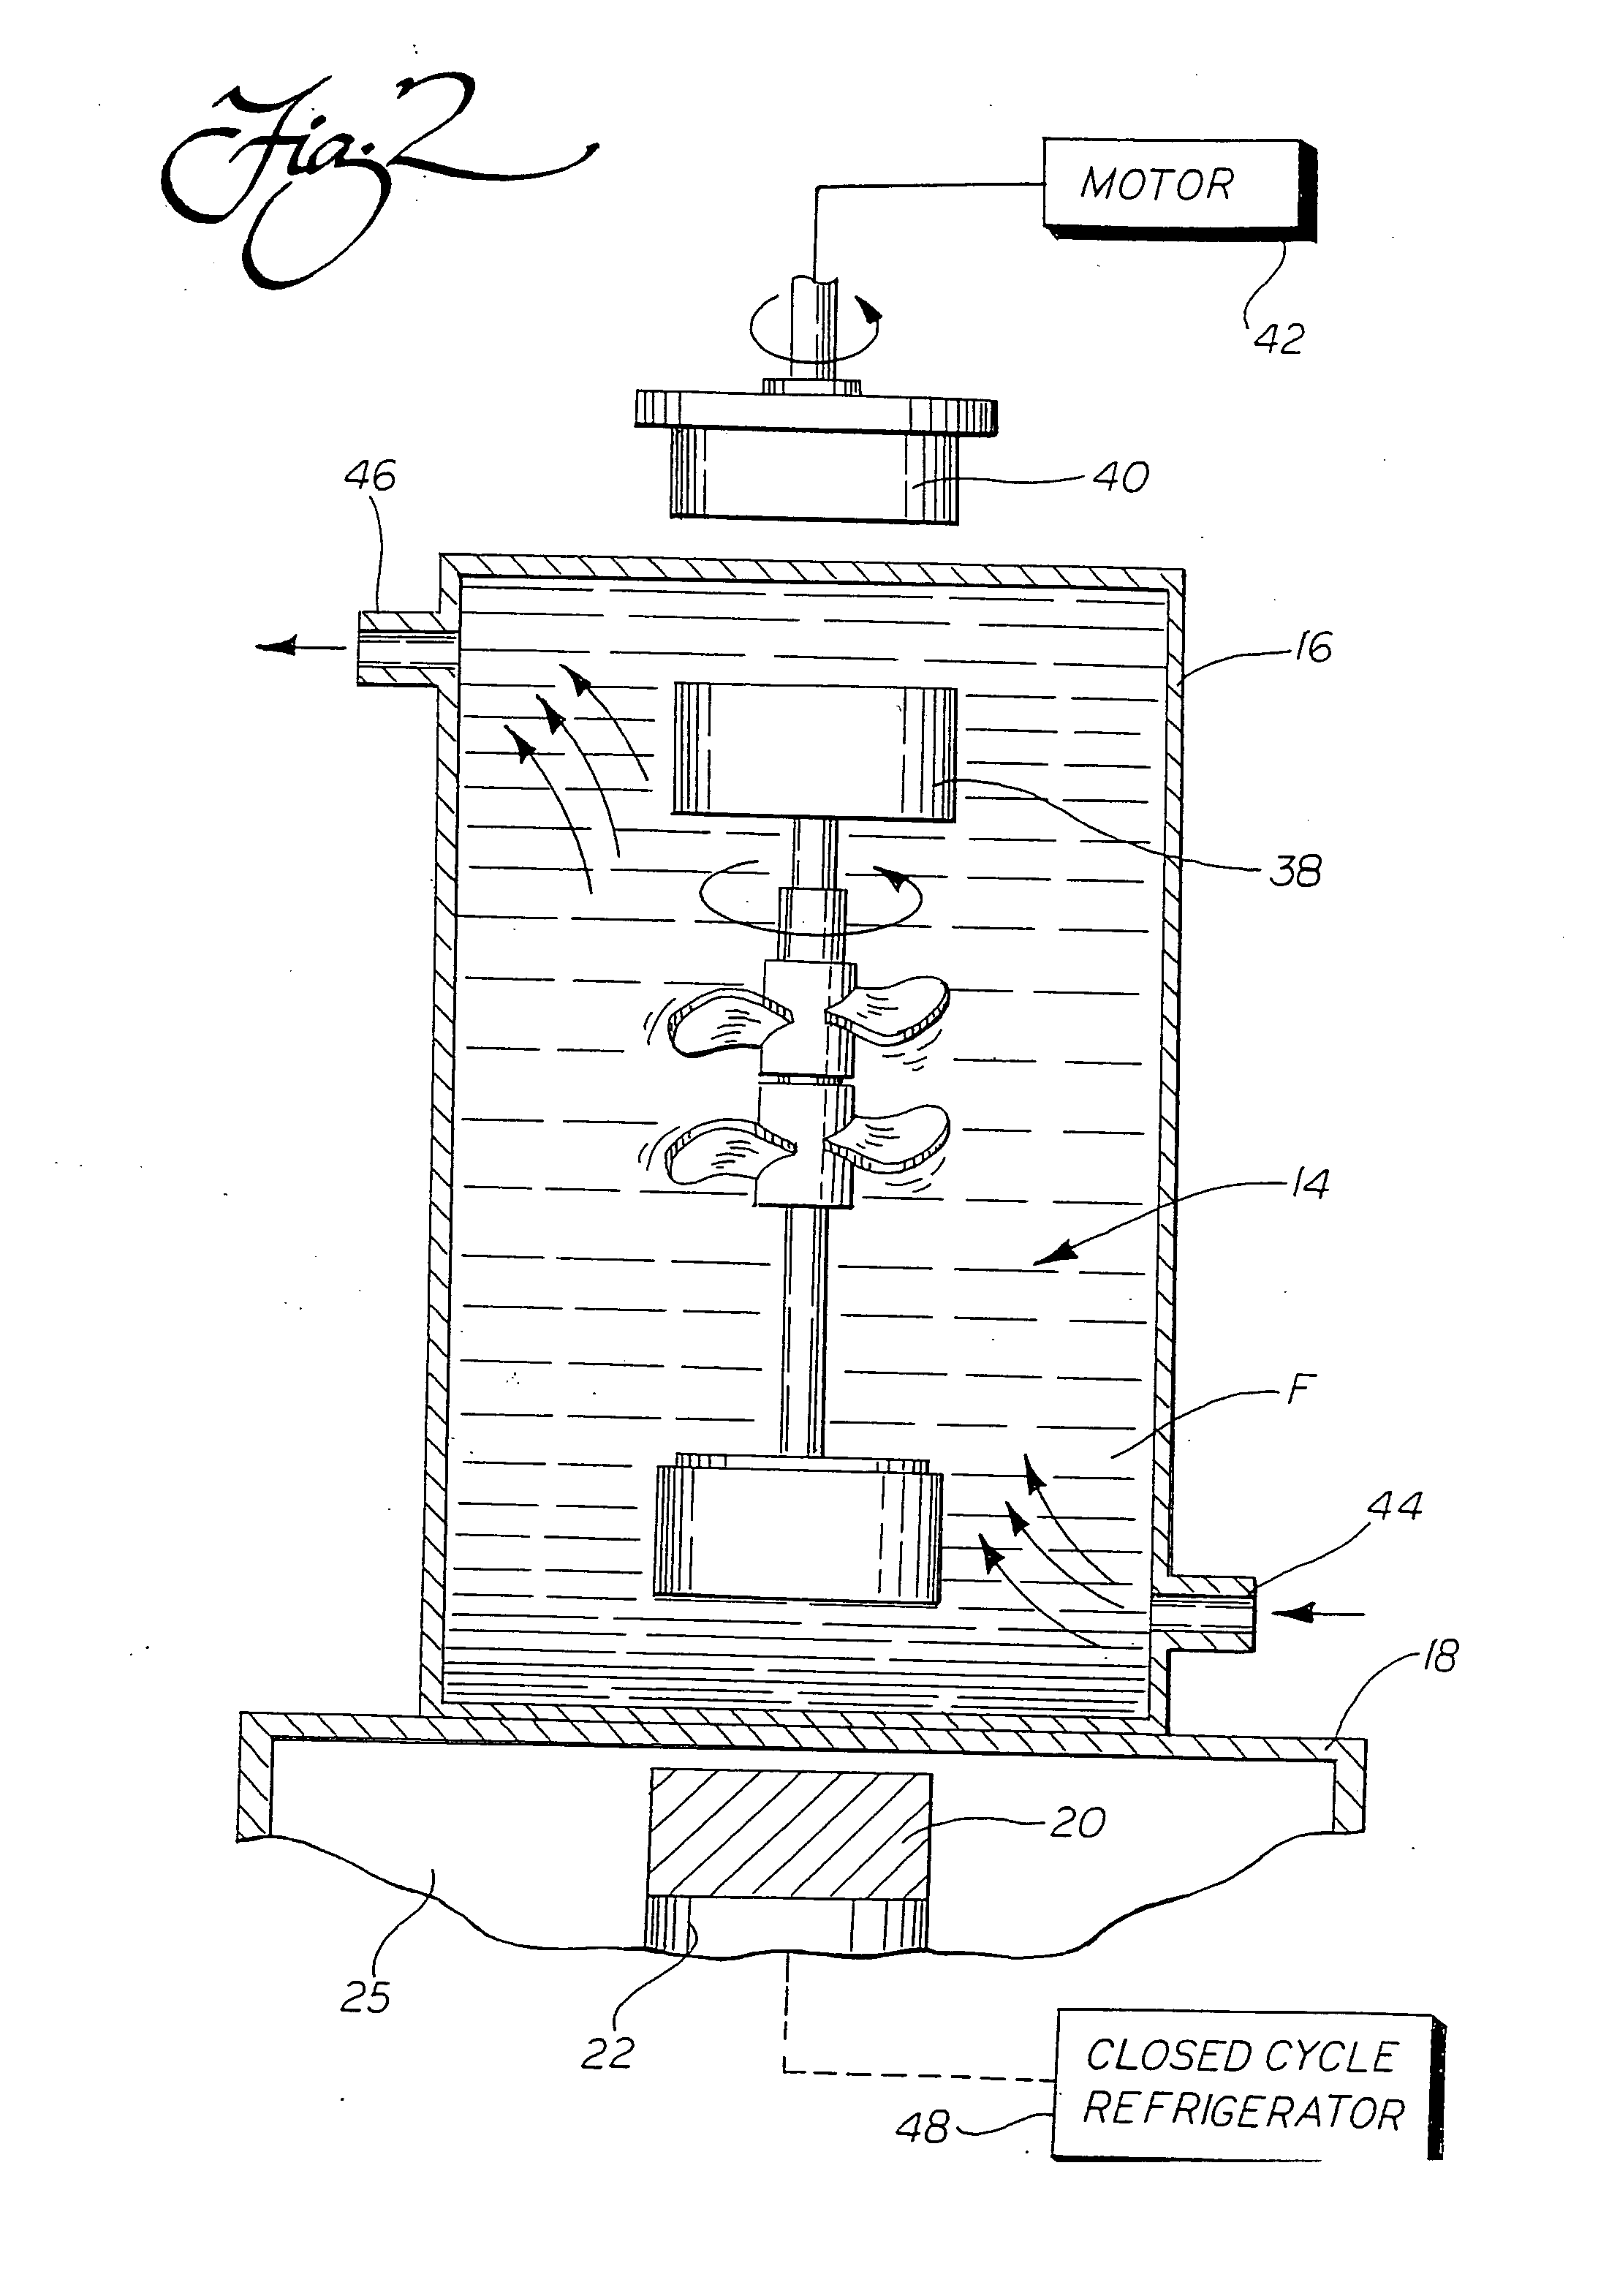 Magnetic coupler for holding a magnetic pumping or mixing element in a vessel